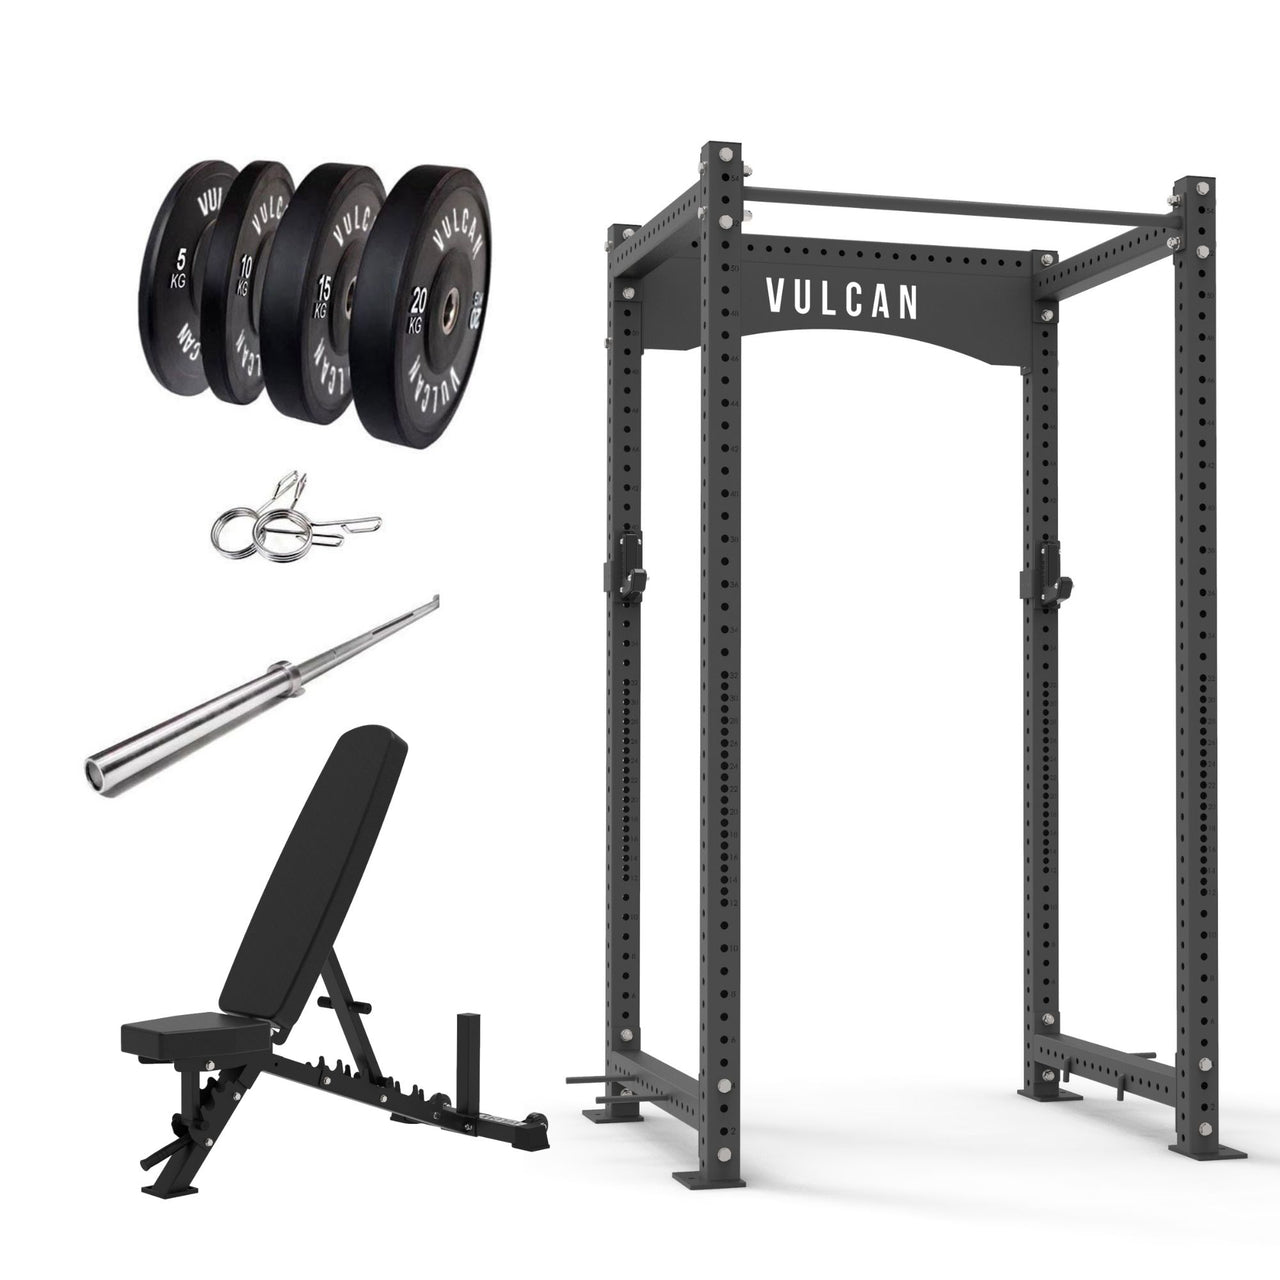 VULCAN Atlas Power Rack, Olympic Barbell, 100kg Black Bumper Weight Plates & Pro Adjustable Bench | IN STOCK